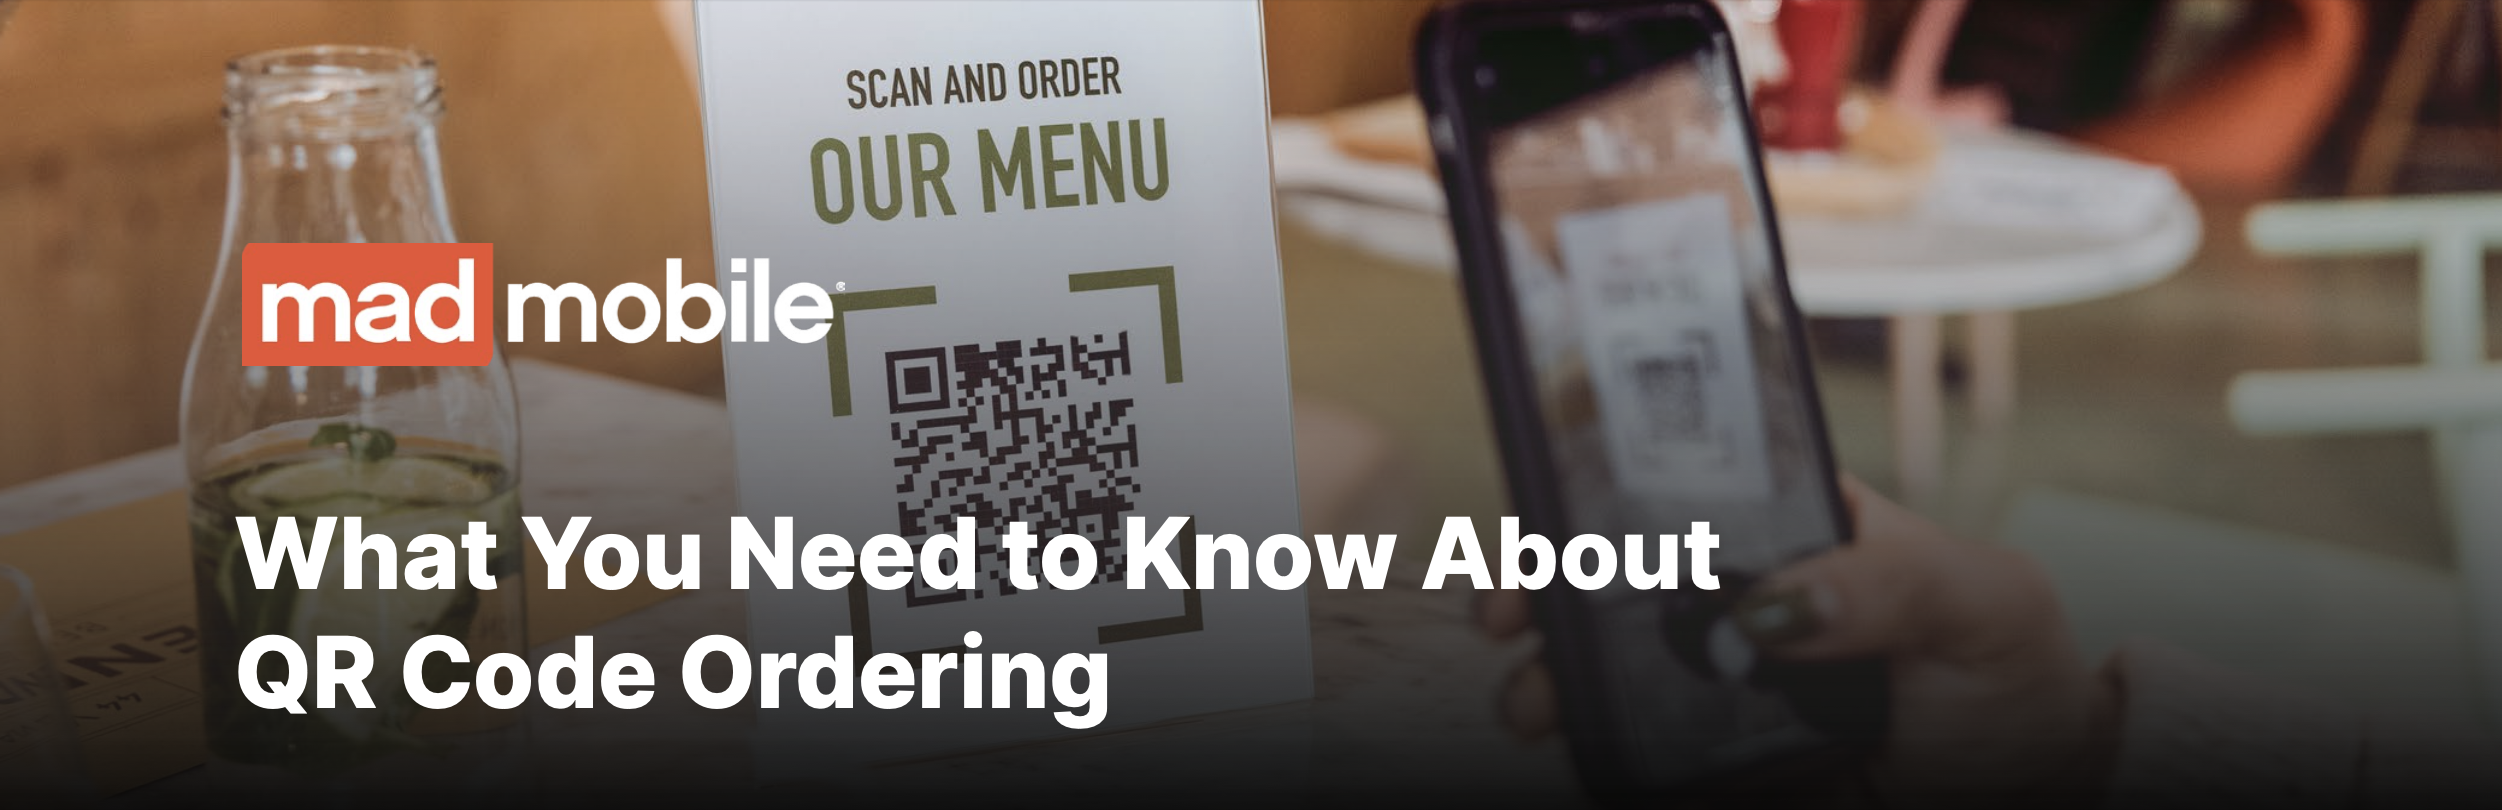 What you need to know about QR code ordering